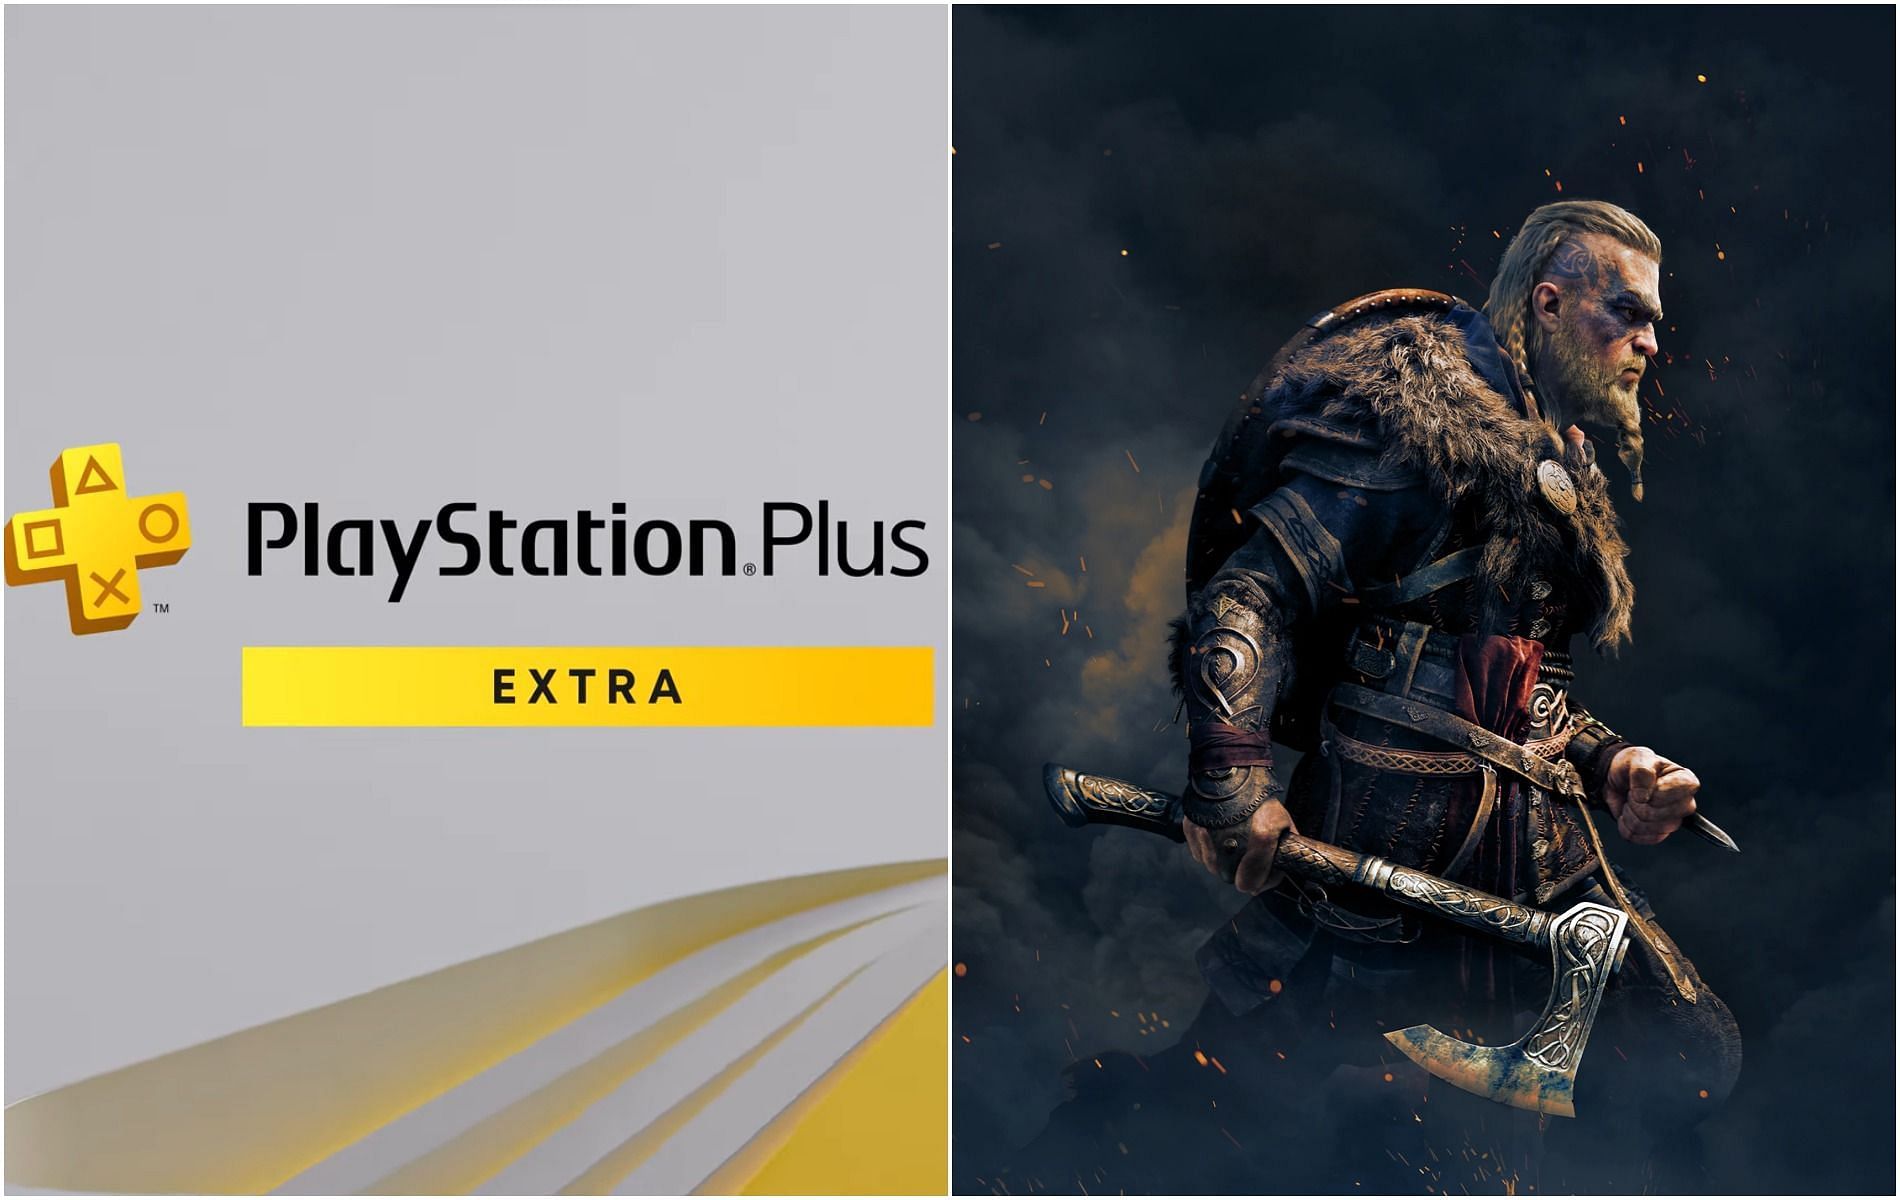 All PS4/PS5 games coming to PlayStation Plus Extra (Image by Sony and Ubisoft)